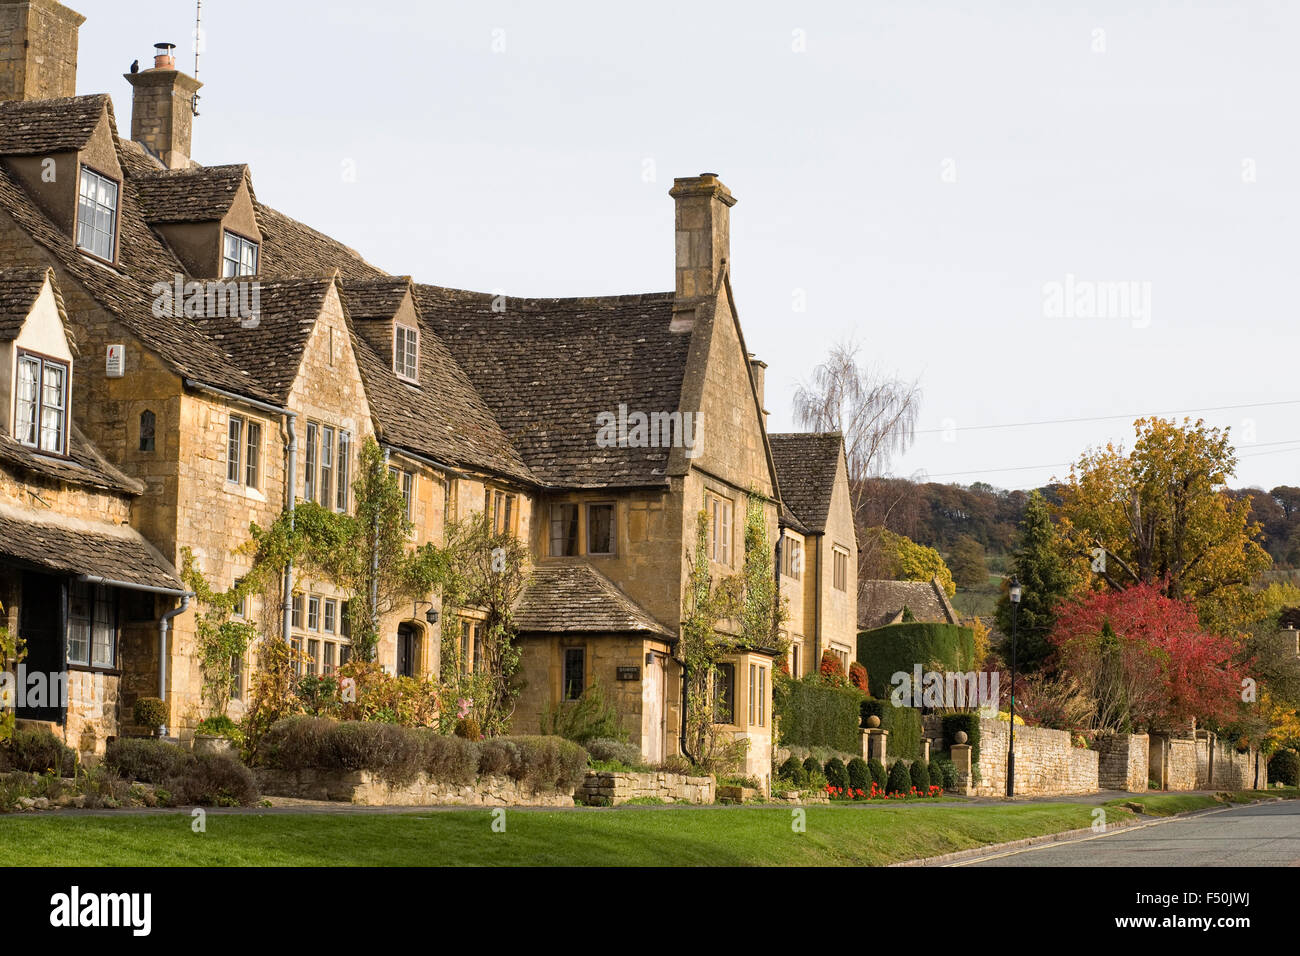 Cotswold stone houses in the Autumn sunshine. Stock Photo